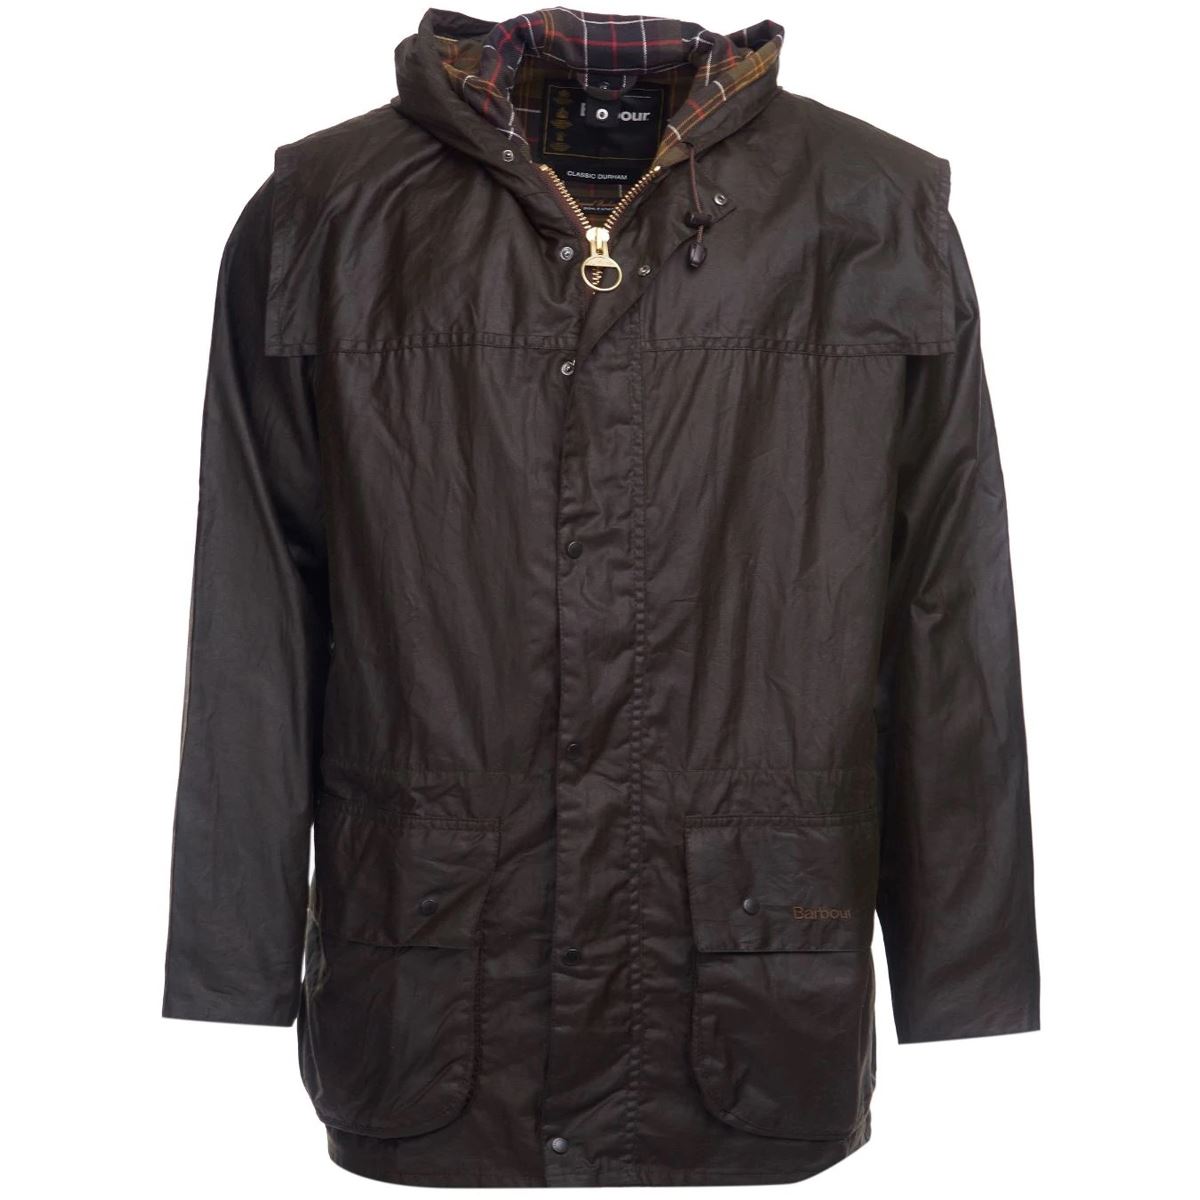 Does the Barbour Durham Jacket offer extra weather defense?